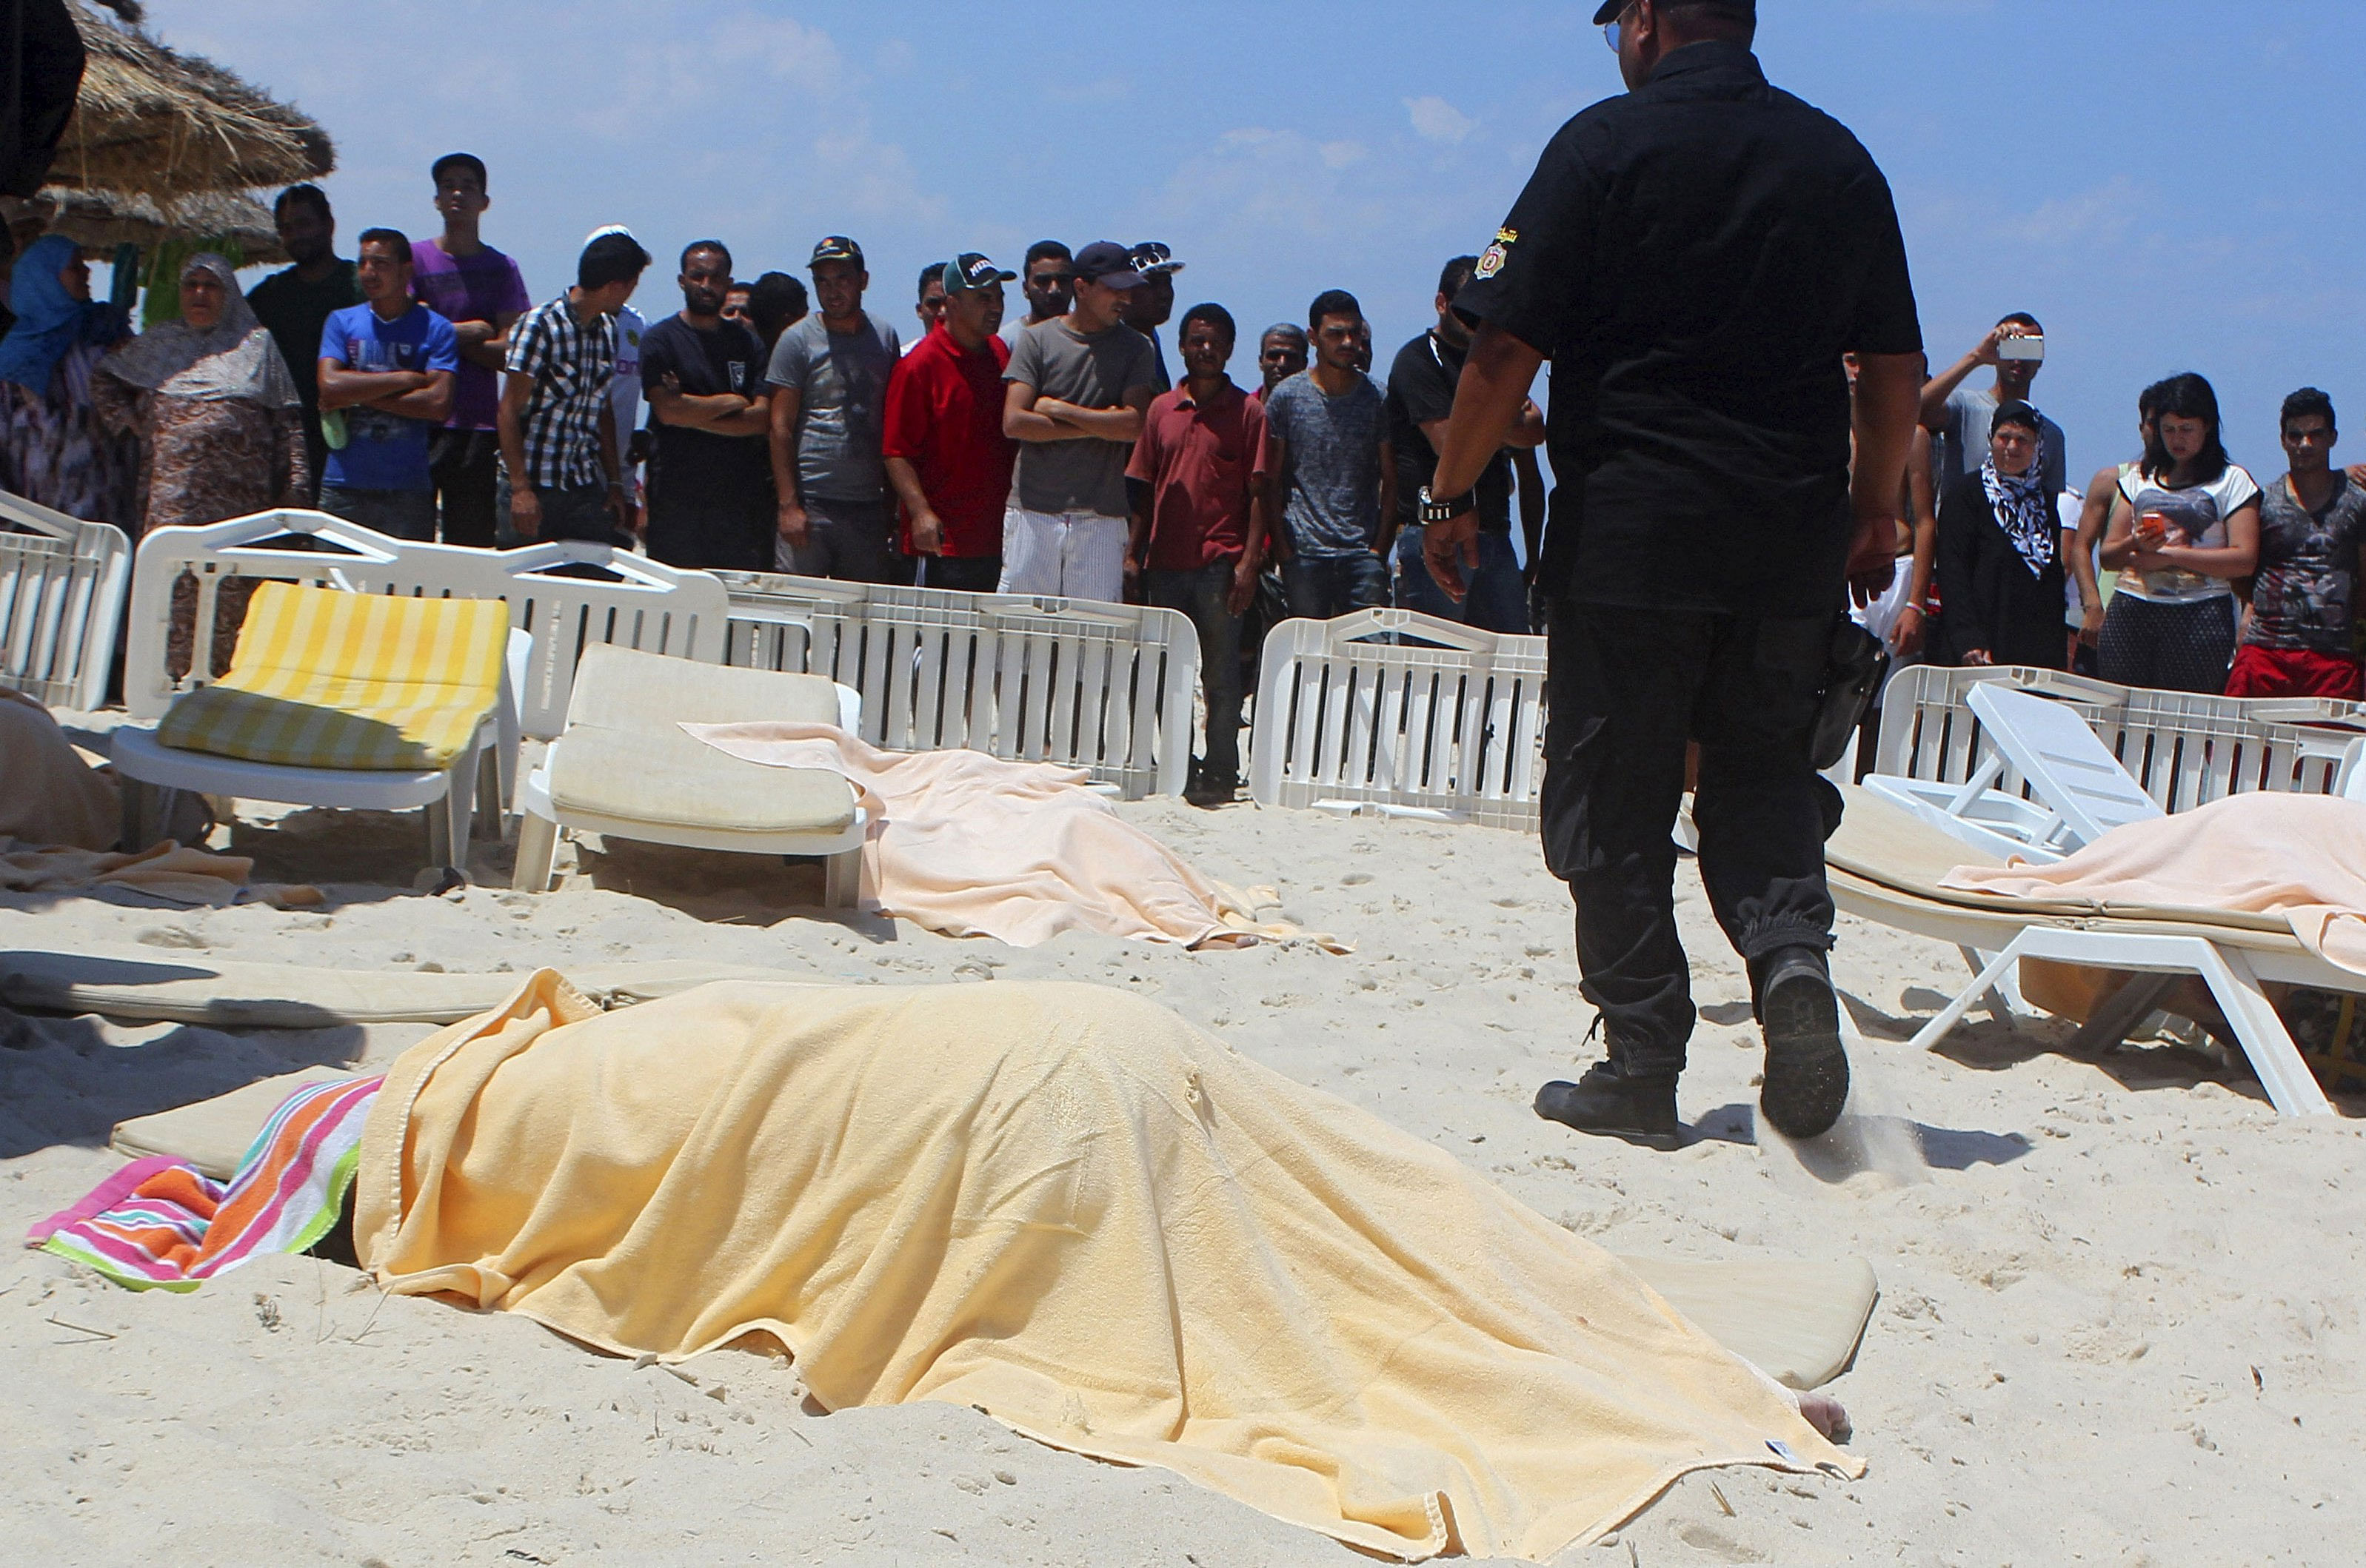 The body of a tourist shot dead by a gunman lies near a beachside hotel in Sousse, Tunisia. Reuters Photo